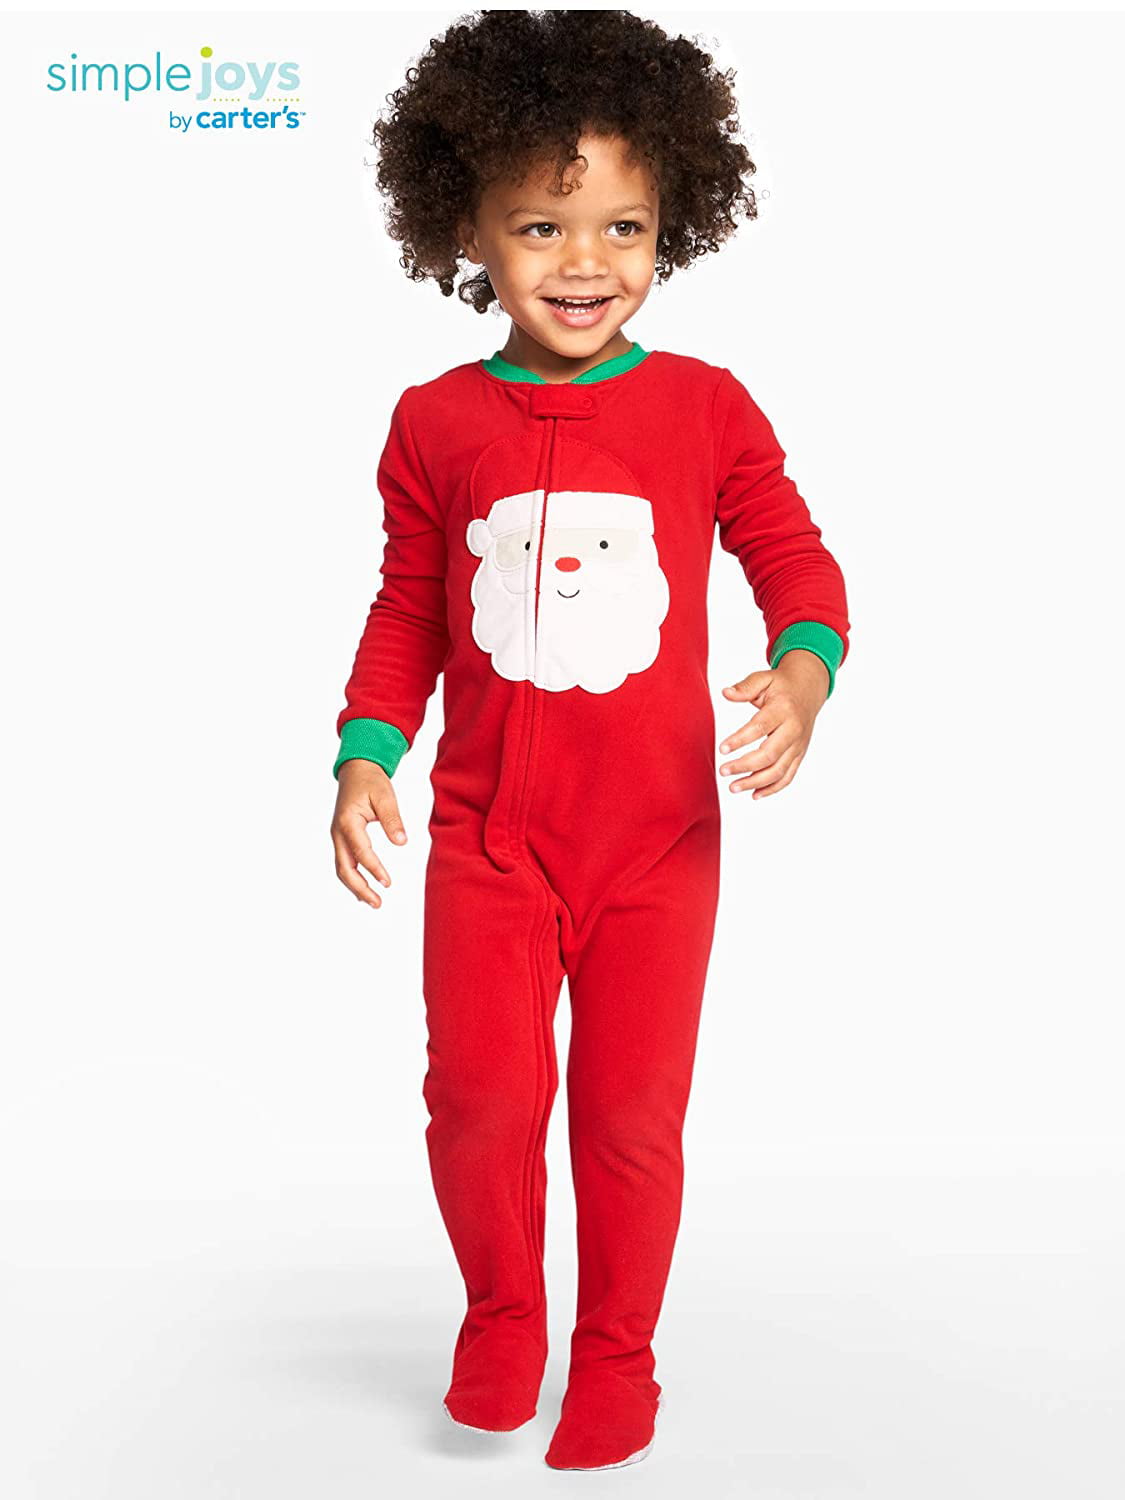 Pack of 2 Simple Joys by Carters Unisex Baby 2-Pack Holiday Loose Fit Flame Resistant Fleece Footed Pajamas 